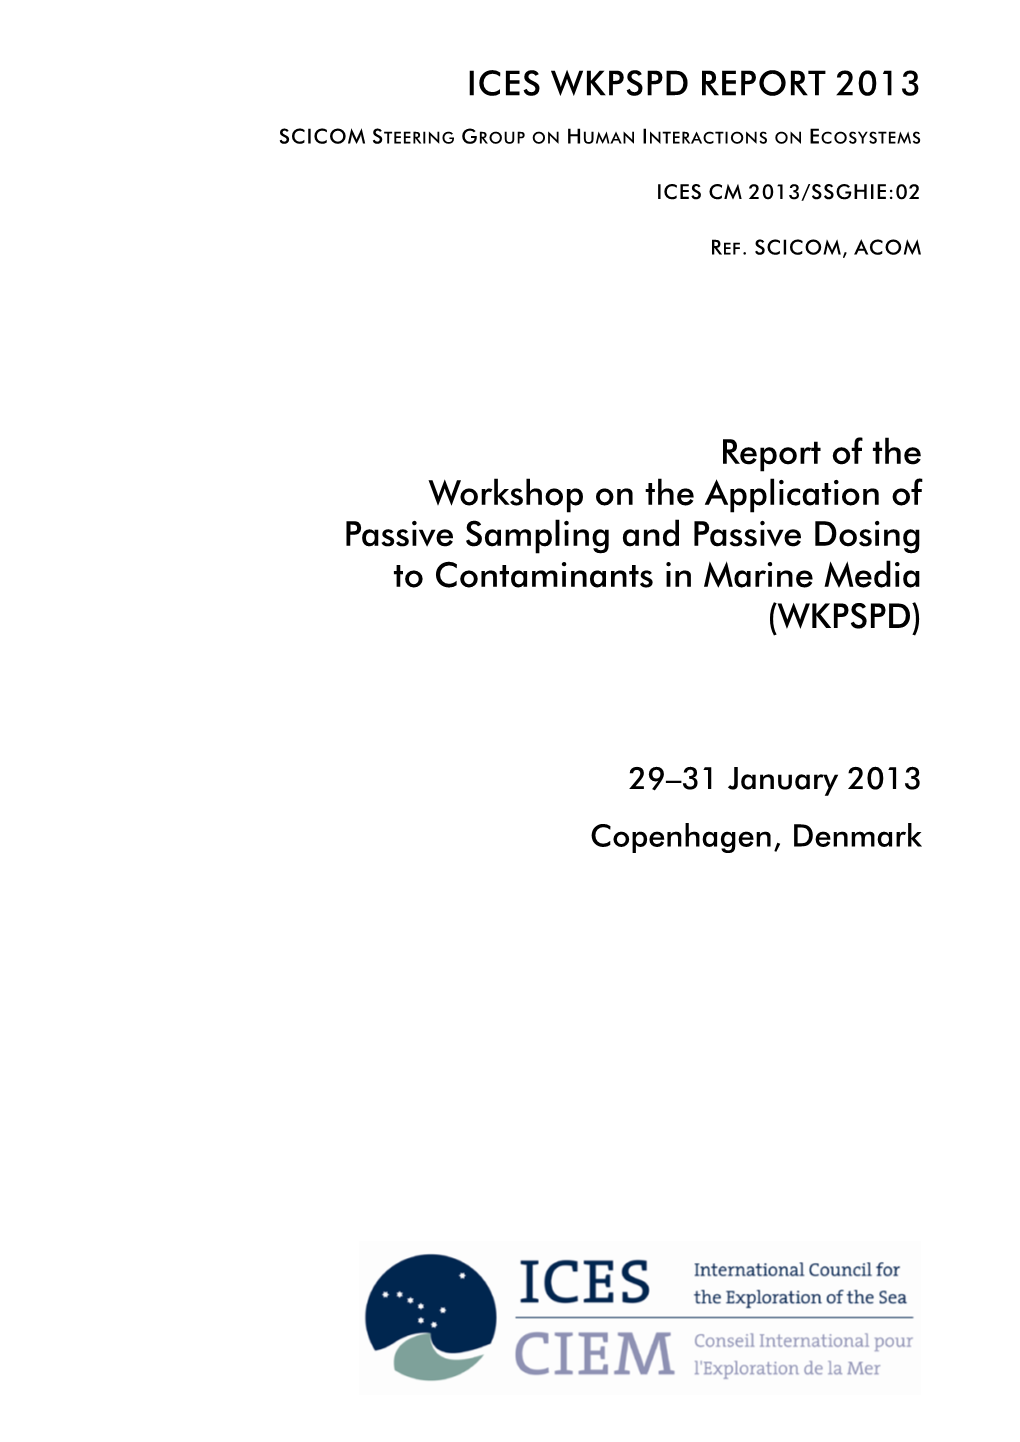 Report of the Workshop on the Application of Passive Sampling and Passive Dosing to Contaminants in Marine Media (WKPSPD)